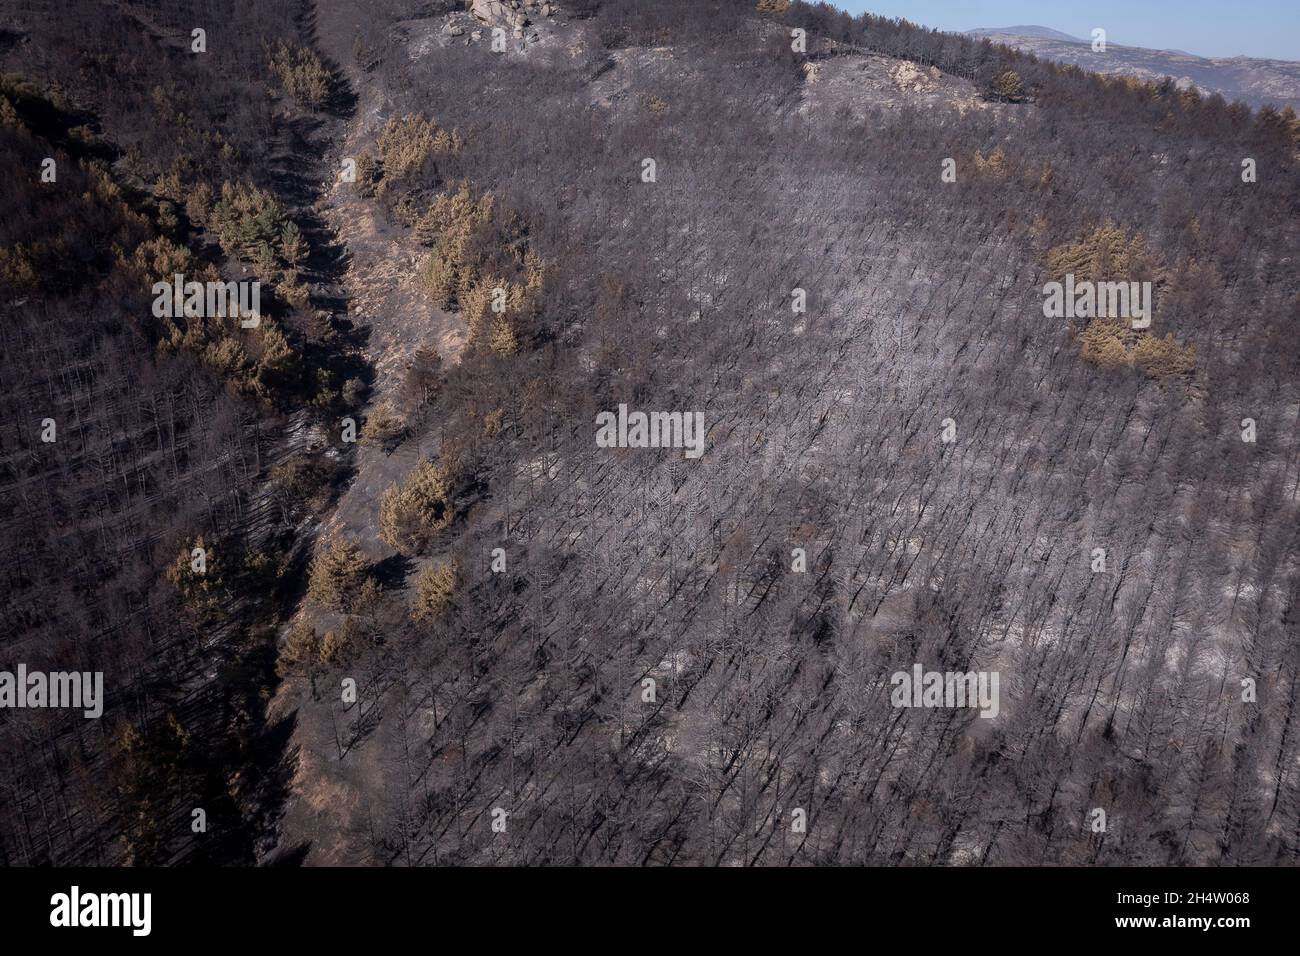 Consequences of a forest fire in Navalacruz or Navalcruz forest, Navalacruz or Navalcruz, Avila, spain Stock Photo